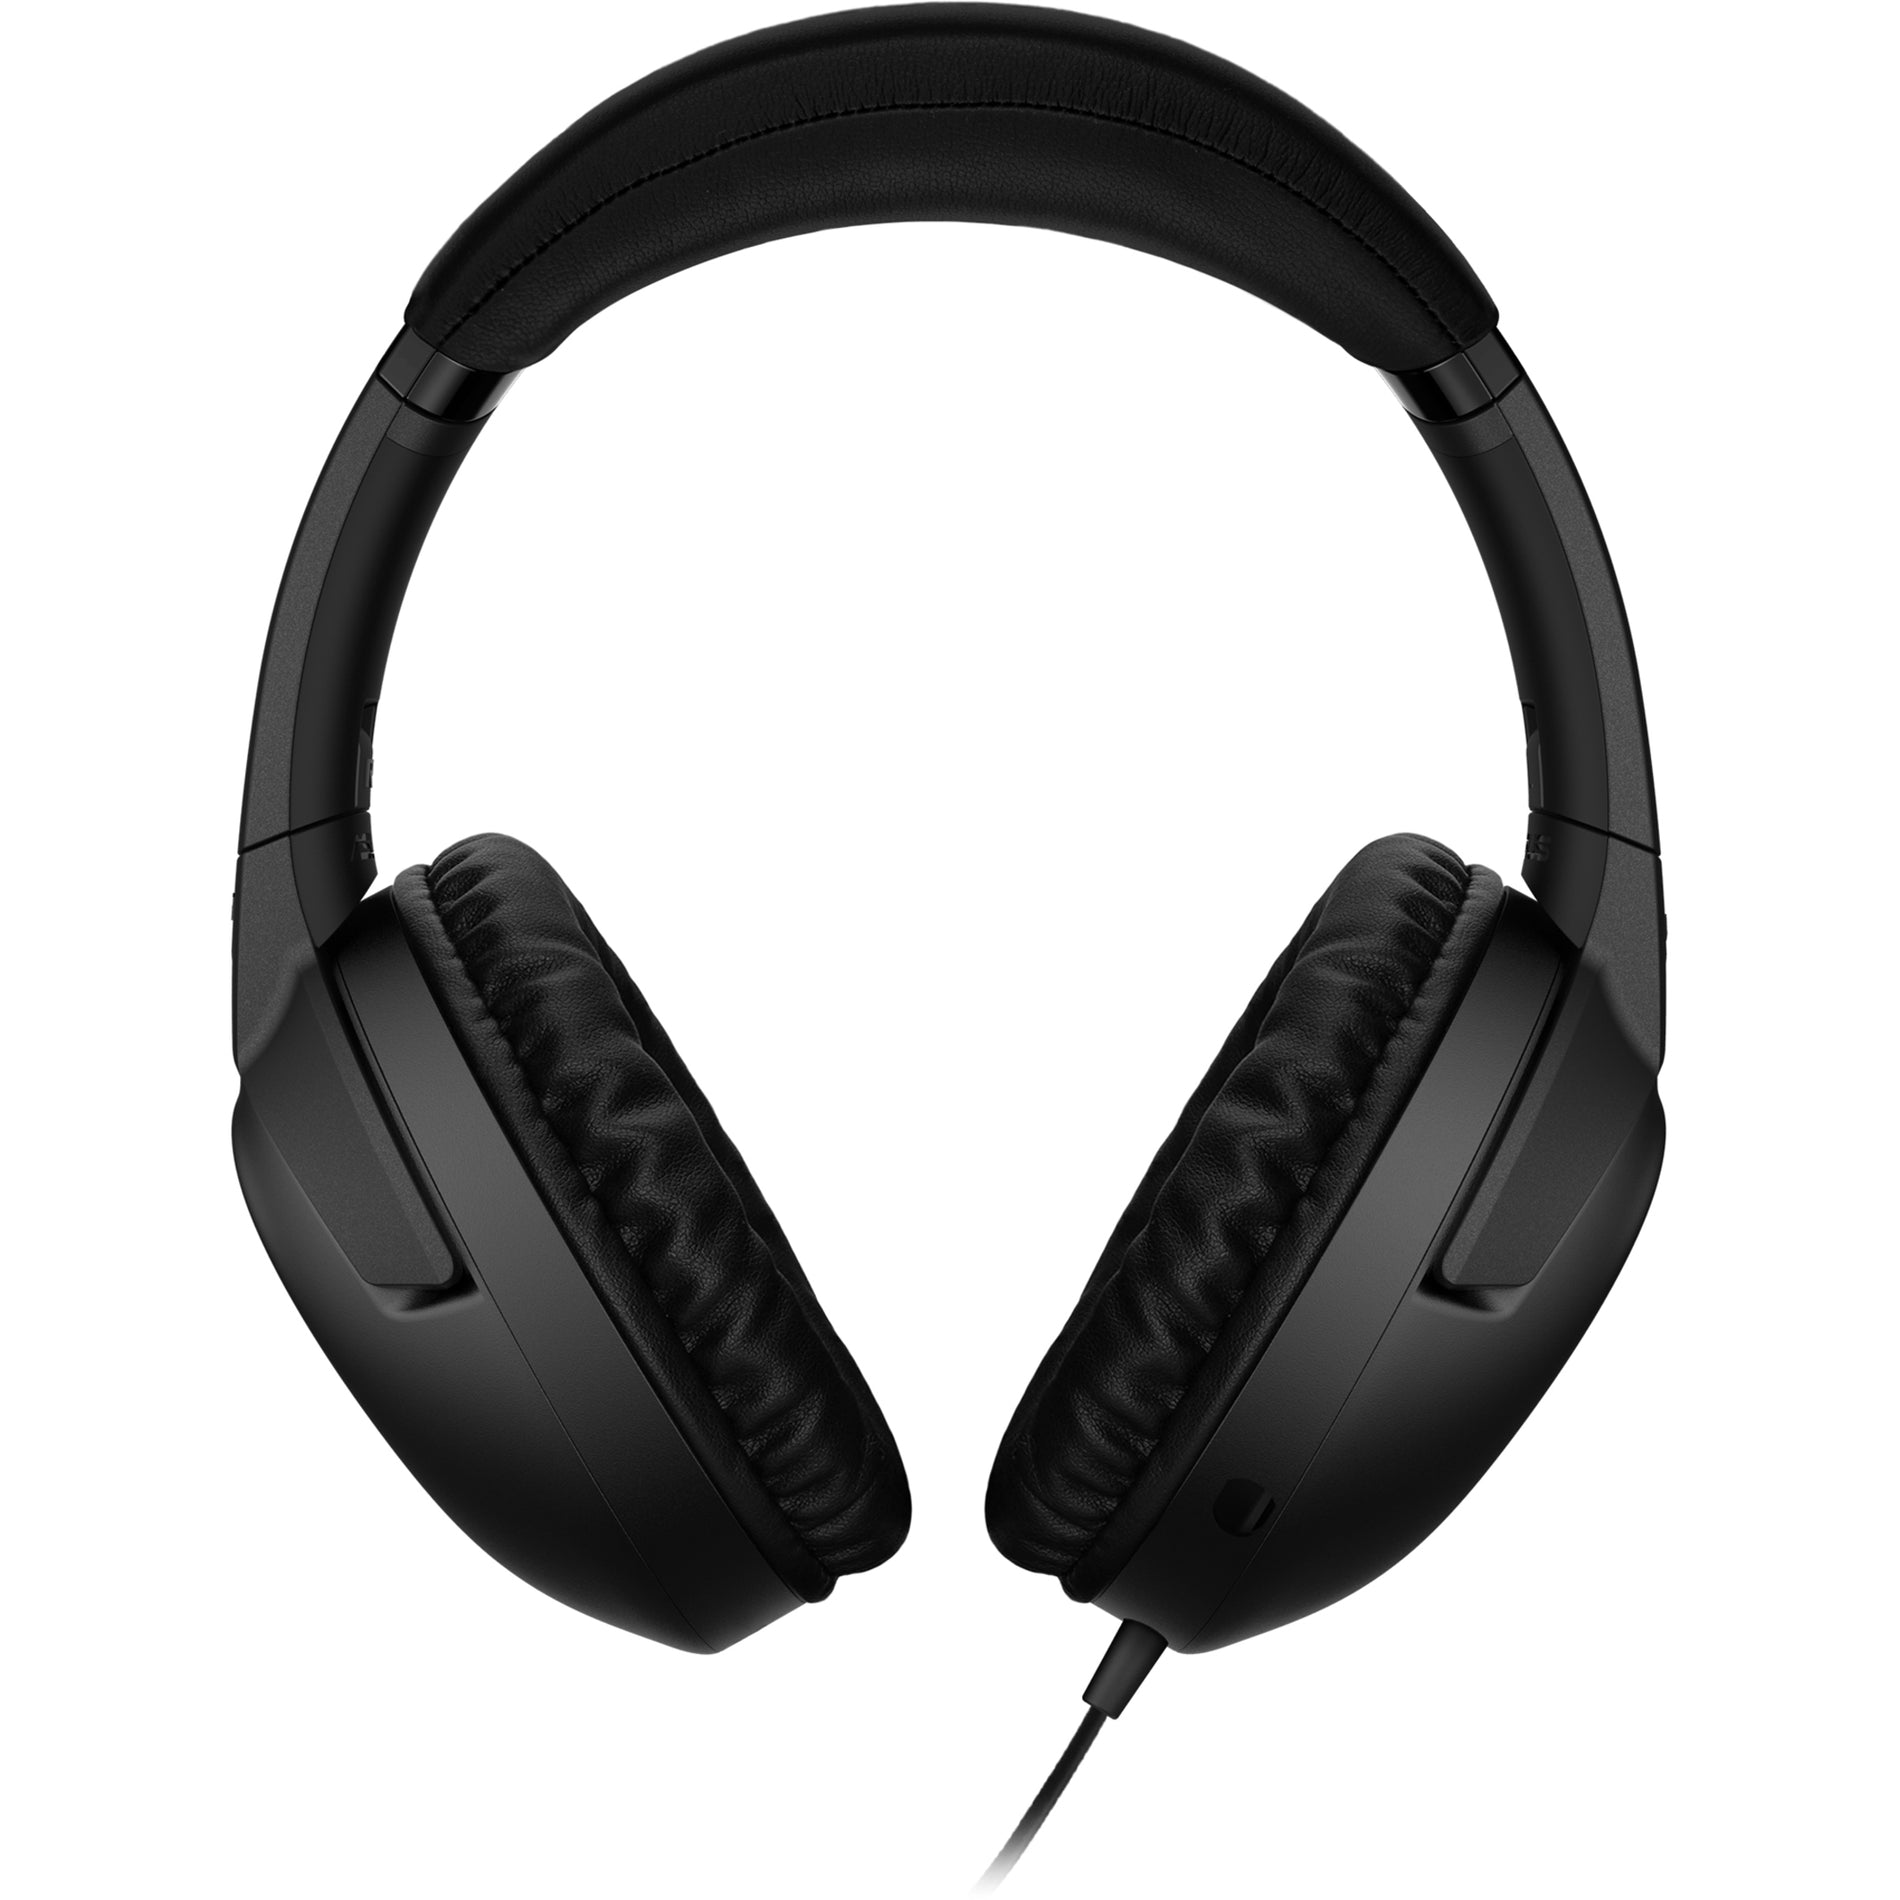 Asus ROG STRIX GO CORE Gaming Headset, Lightweight, Foldable, Mini-phone (3.5mm) Wired Stereo Circumaural